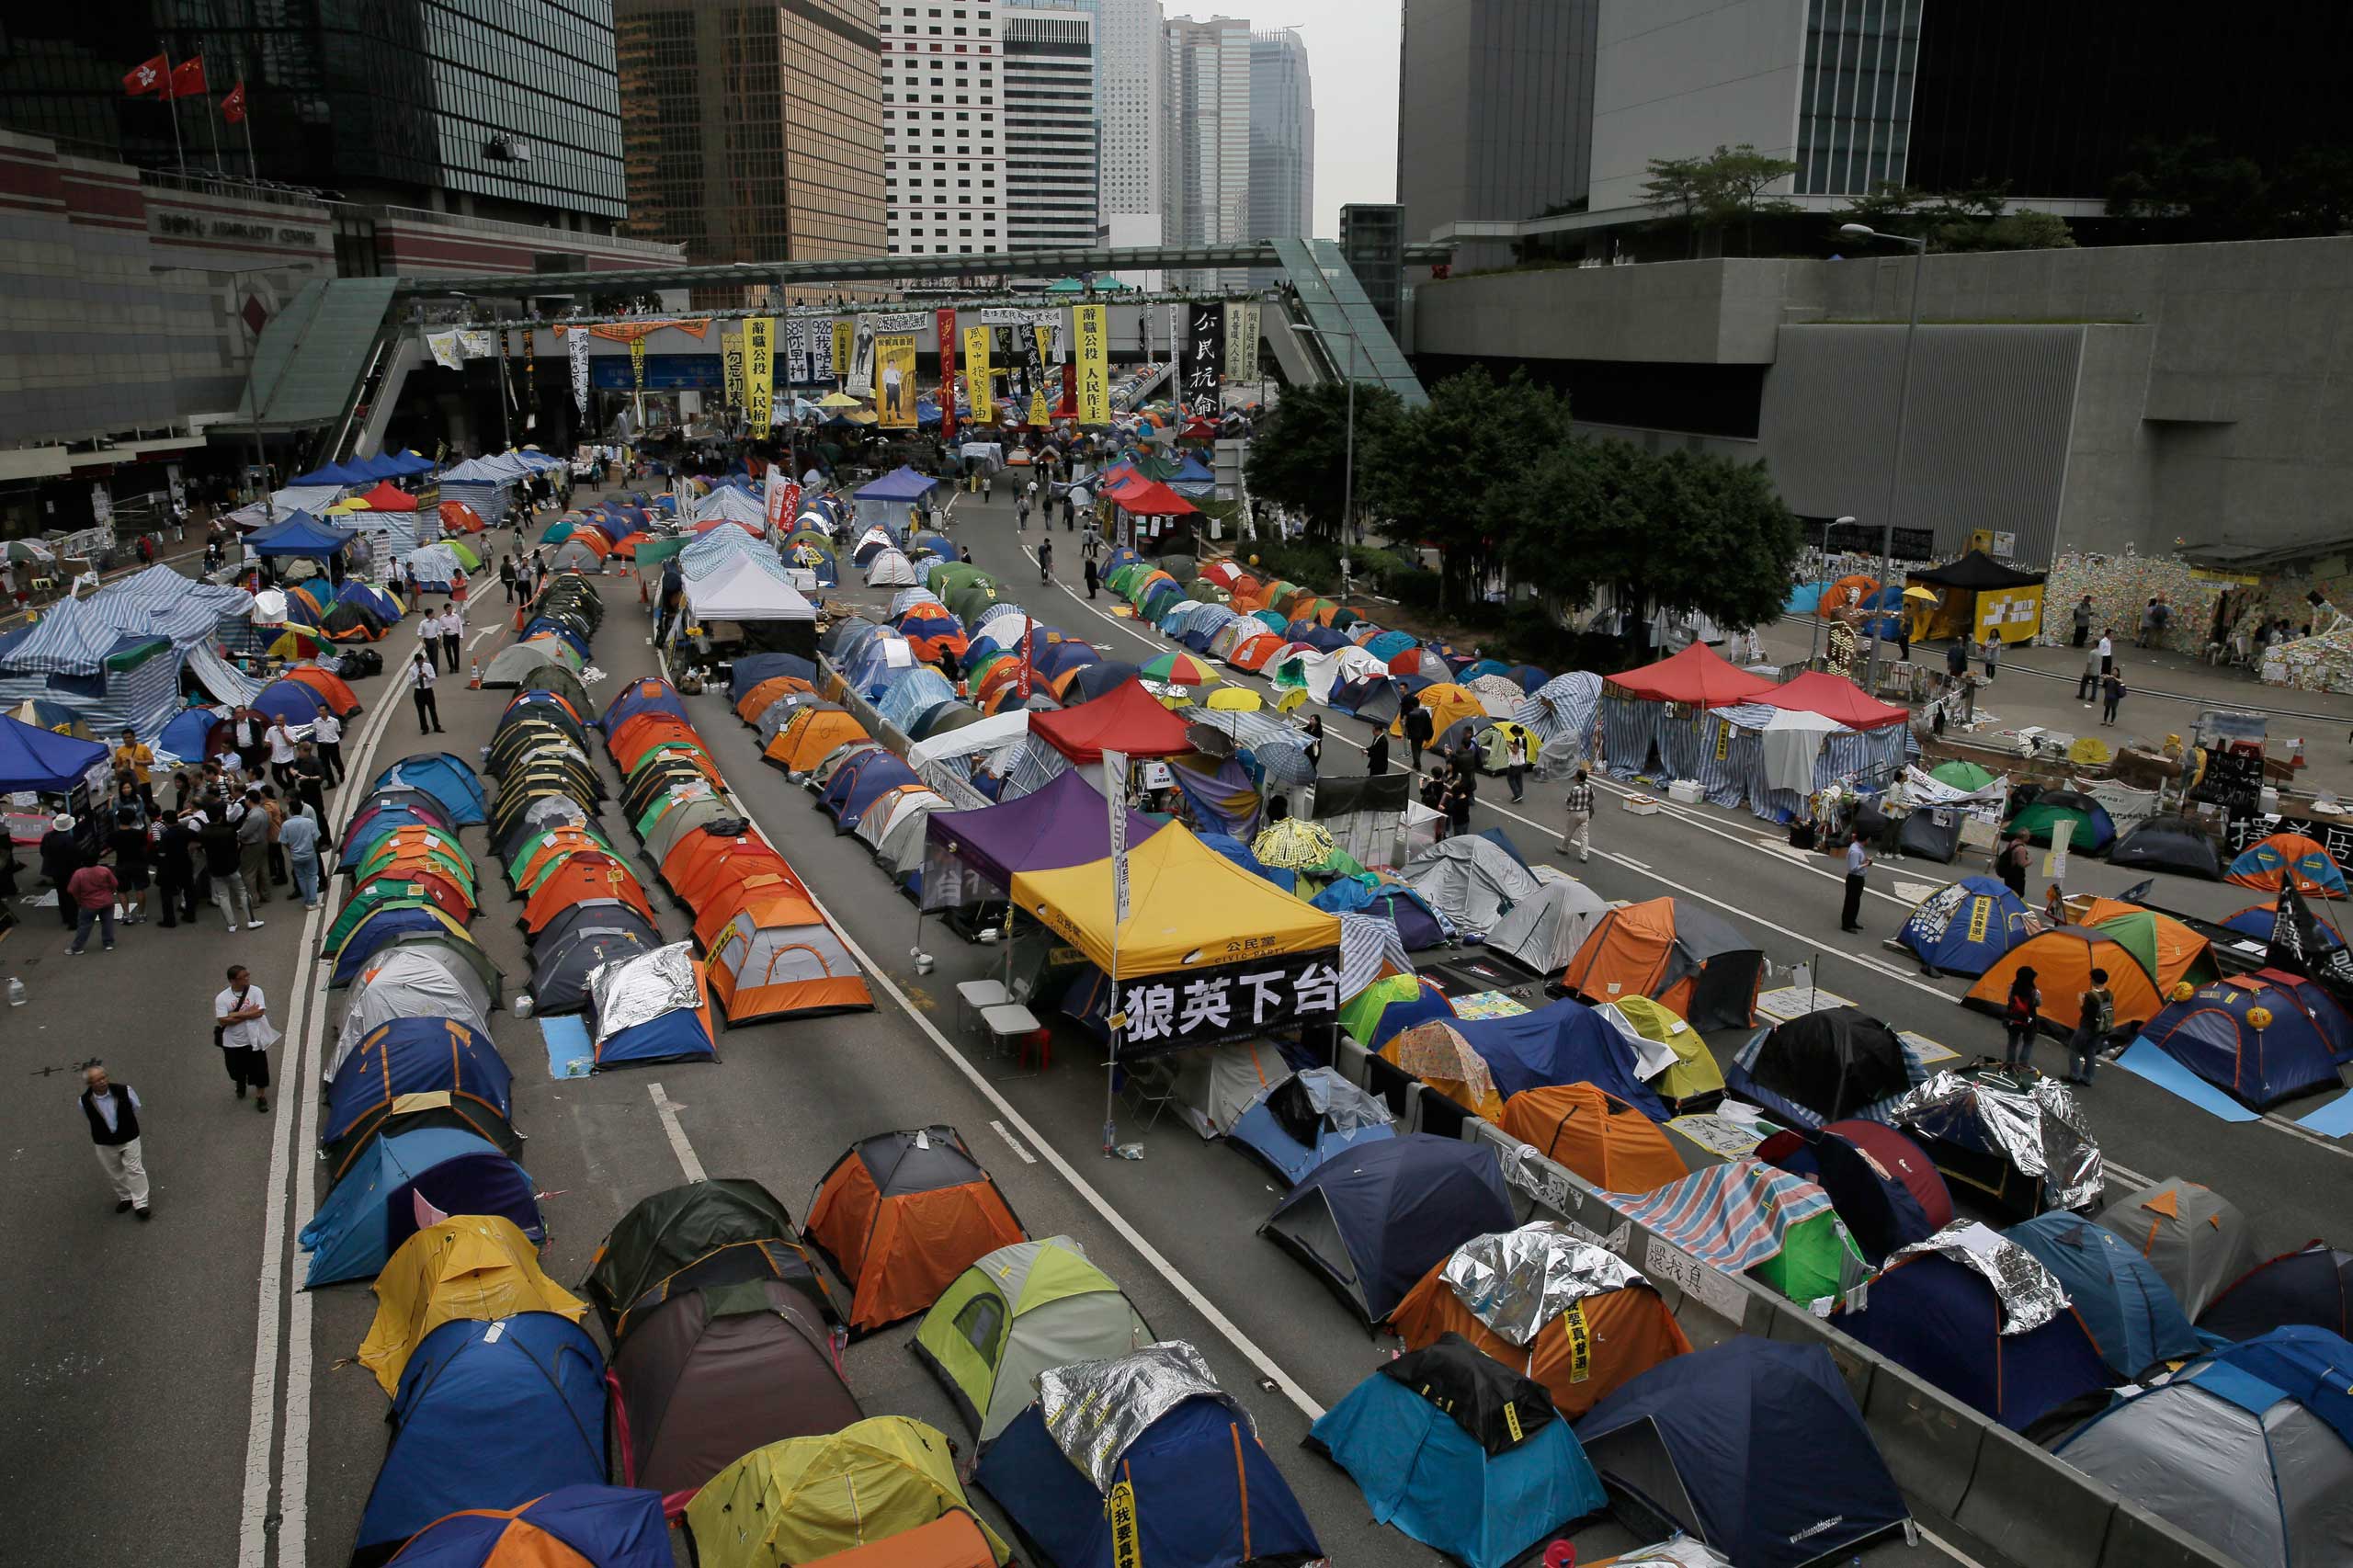 Tents set up by pro-democracy protesters are seen in an occupied area outside the government headquarters in Hong Kong's Admiralty district, Nov. 12, 2014. (Vincent Yu—AP)